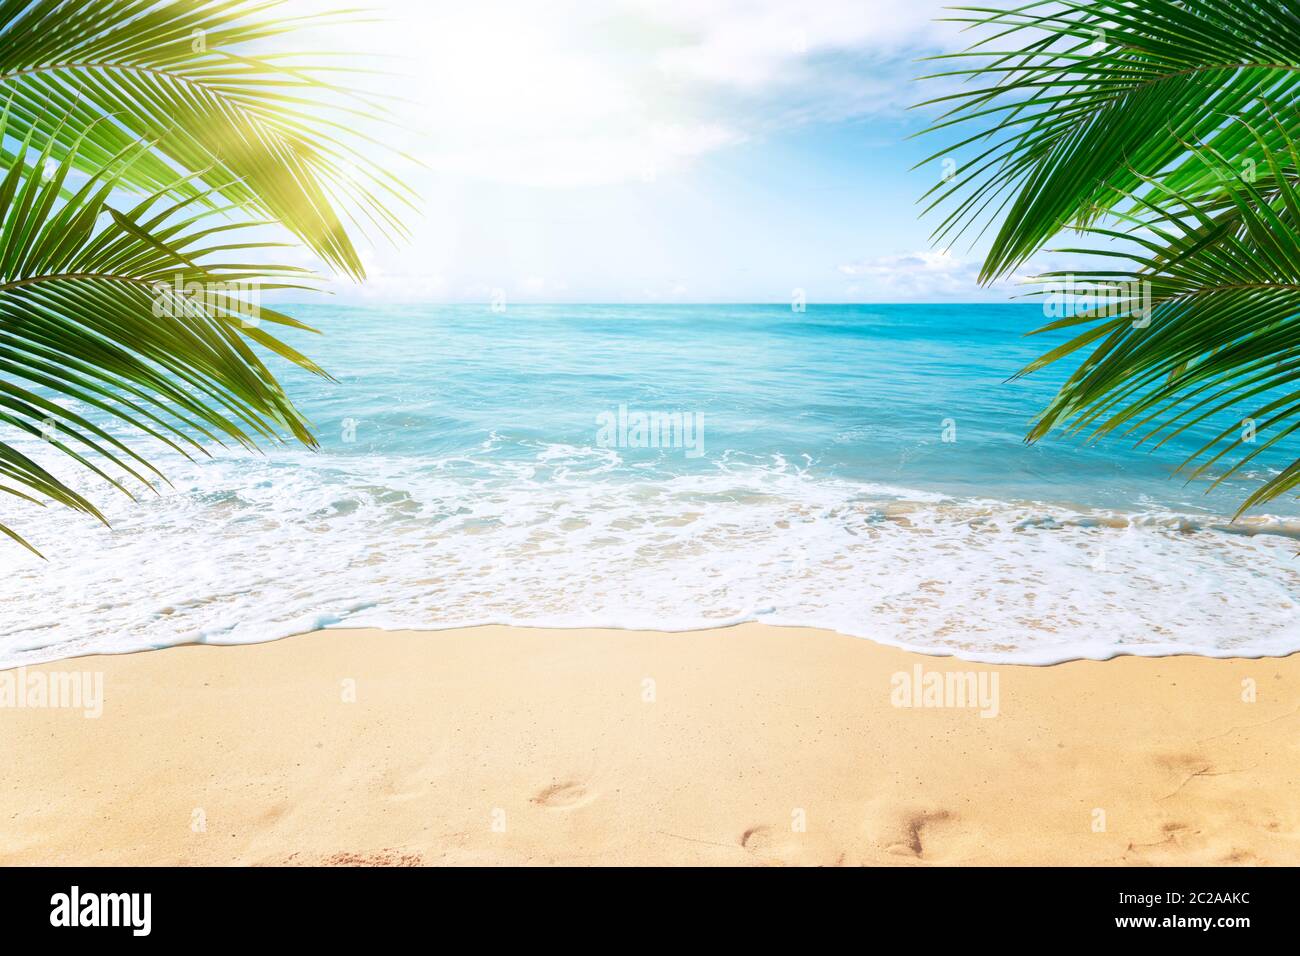 Sunny tropical beach with palm trees Stock Photo